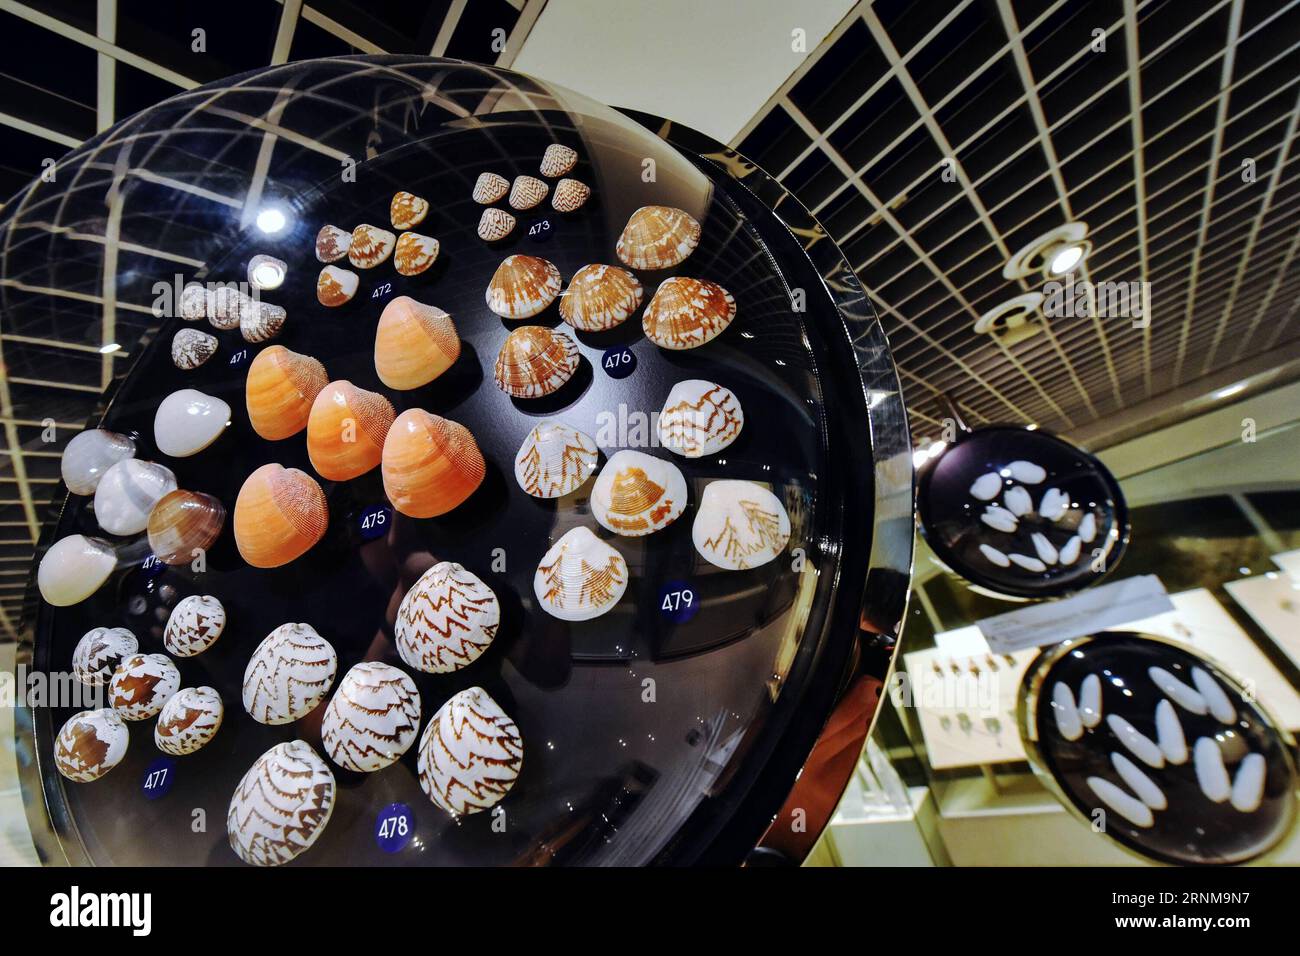 (170518) -- BANGKOK, May 18, 2017 -- Various seashells are displayed at the Bangkok Seashell Museum in Bangkok, Thailand, May 18, 2017. Embracing a collection of over 3,000 specimens of 600 species, the Bangkok Seashell Museum not only enchants its visitors with a kaleidoscope of natural shapes and colors, but also serves as a knowledge source for those interested in the evolution and classification of shelled animals. ) (hy) THAILAND-BANGKOK-SEASHELL-MUSEUM-COLLECTION LixMangmang PUBLICATIONxNOTxINxCHN   Bangkok May 18 2017 Various seashells are displayed AT The Bangkok Seashell Museum in Ban Stock Photo